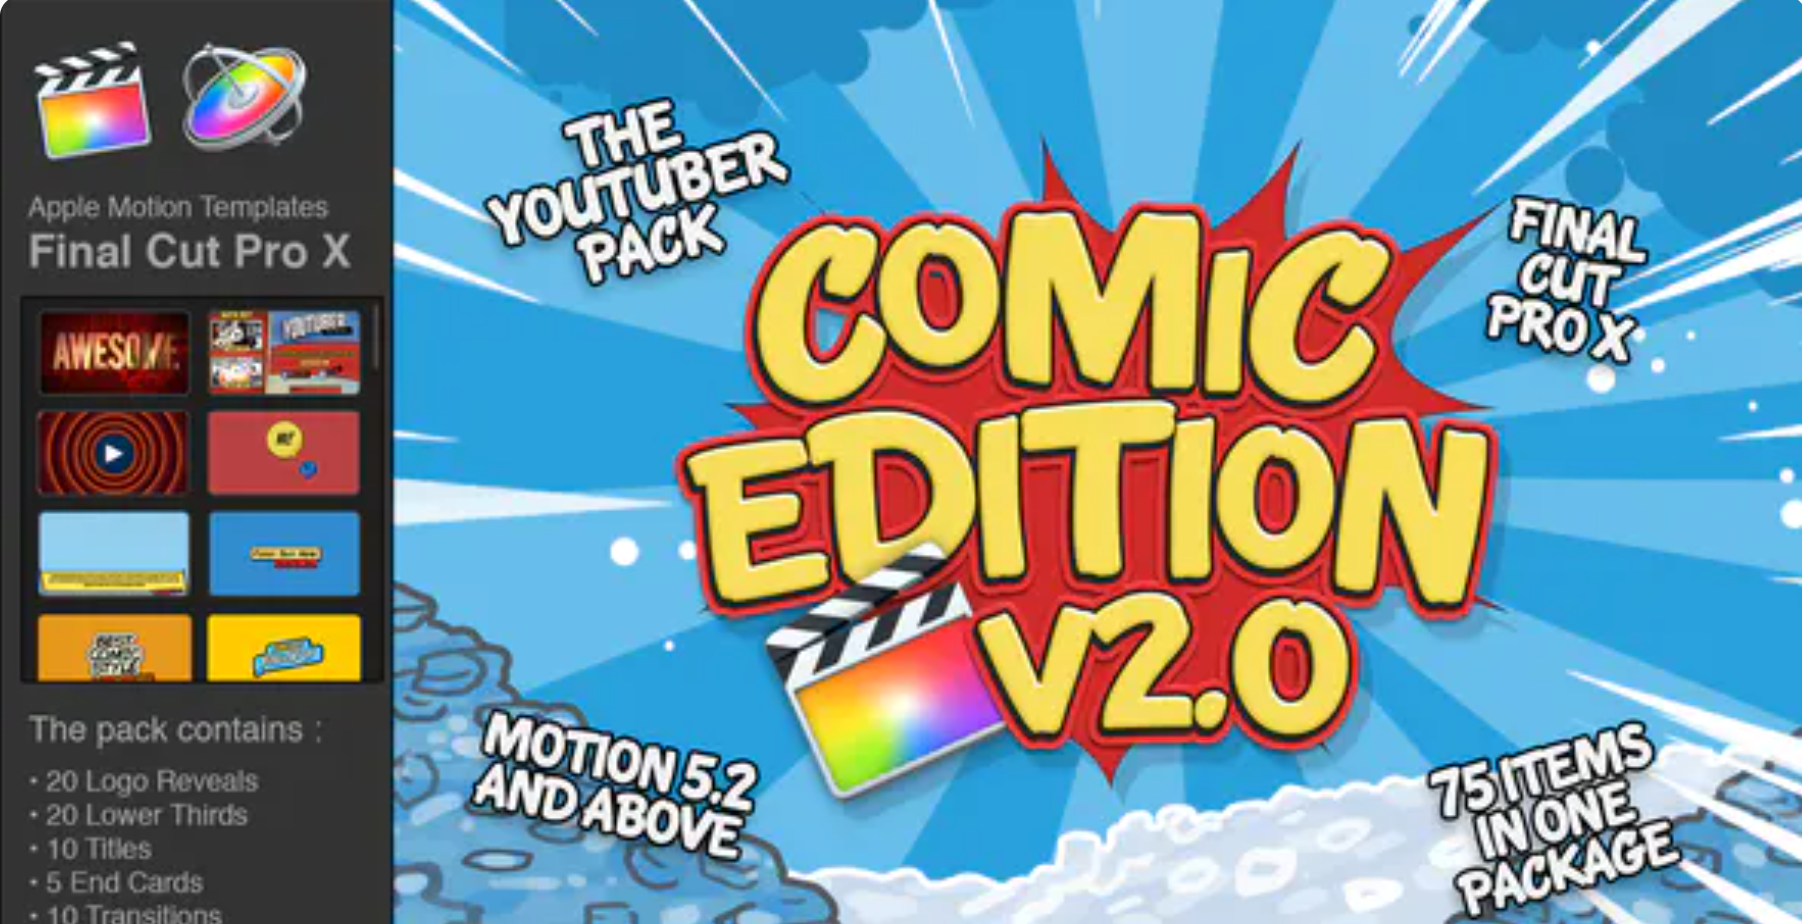 The YouTuber Pack - Comic Edition V2.0 - Final Cut Pro X 2